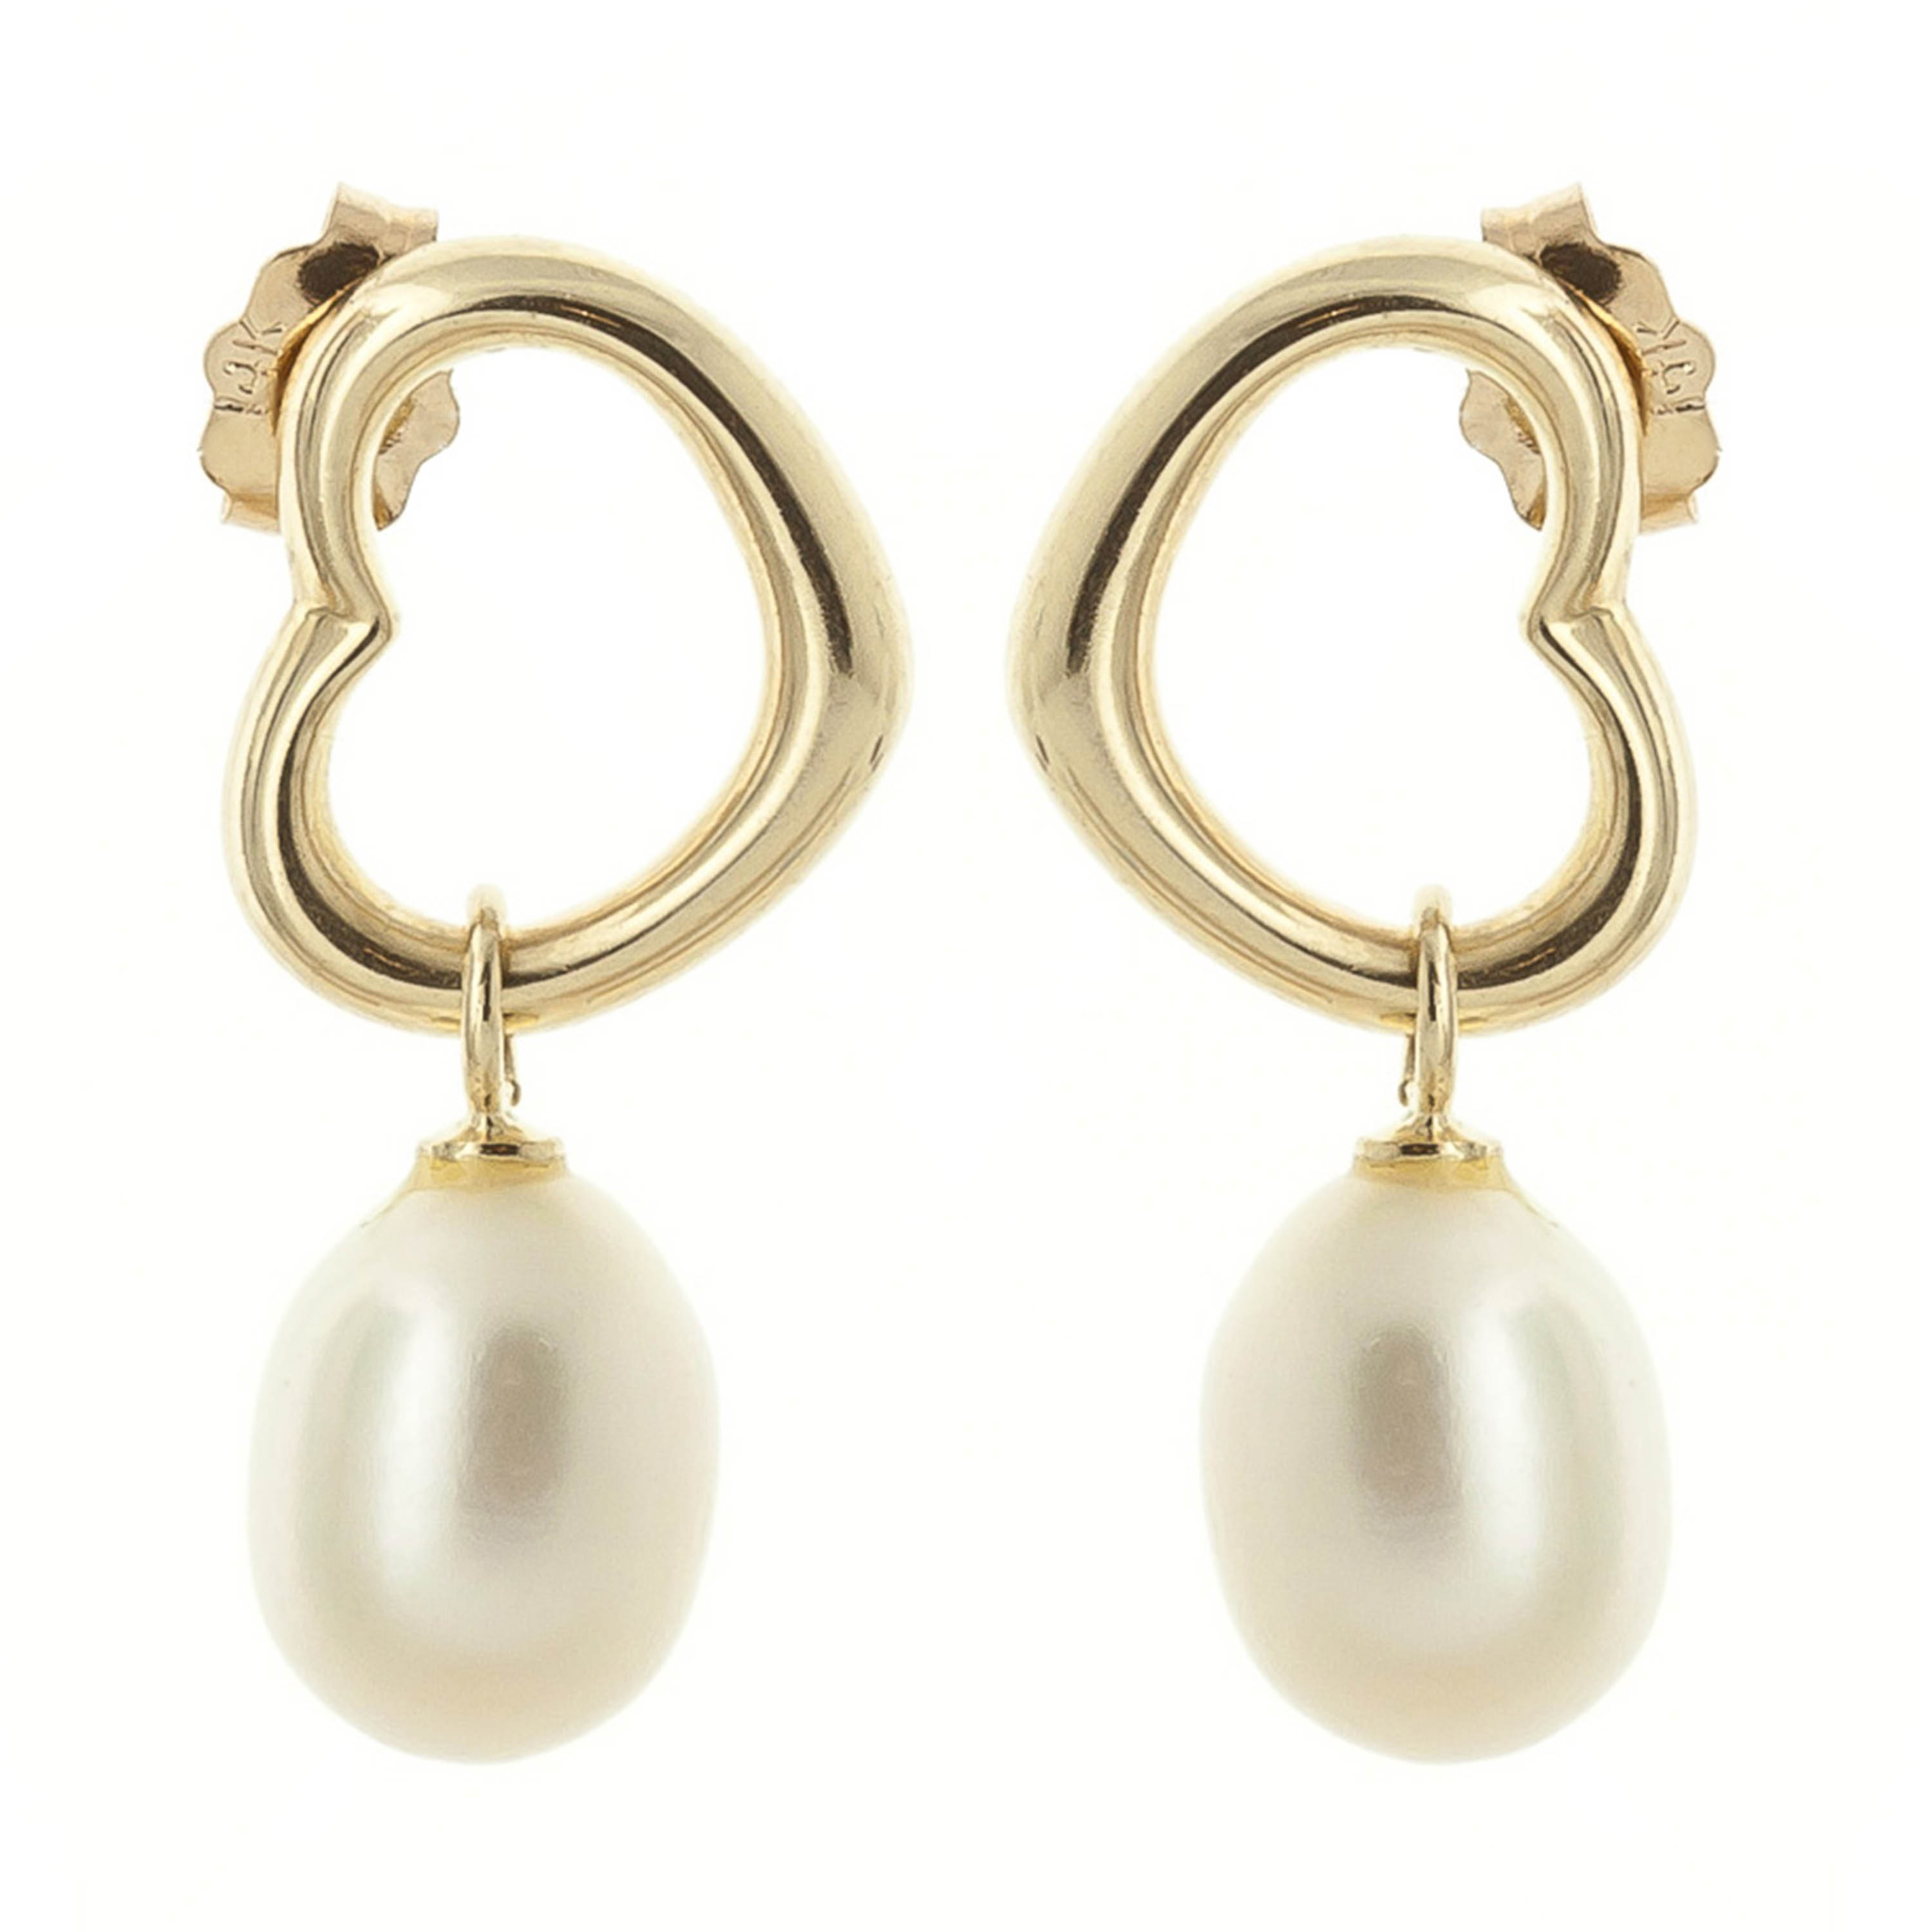 Galaxy Gold 8 Carat 14k Solid Gold Open Heart Stud Earrings with Dangling Freshwater-cultured Pearls - image 2 of 5